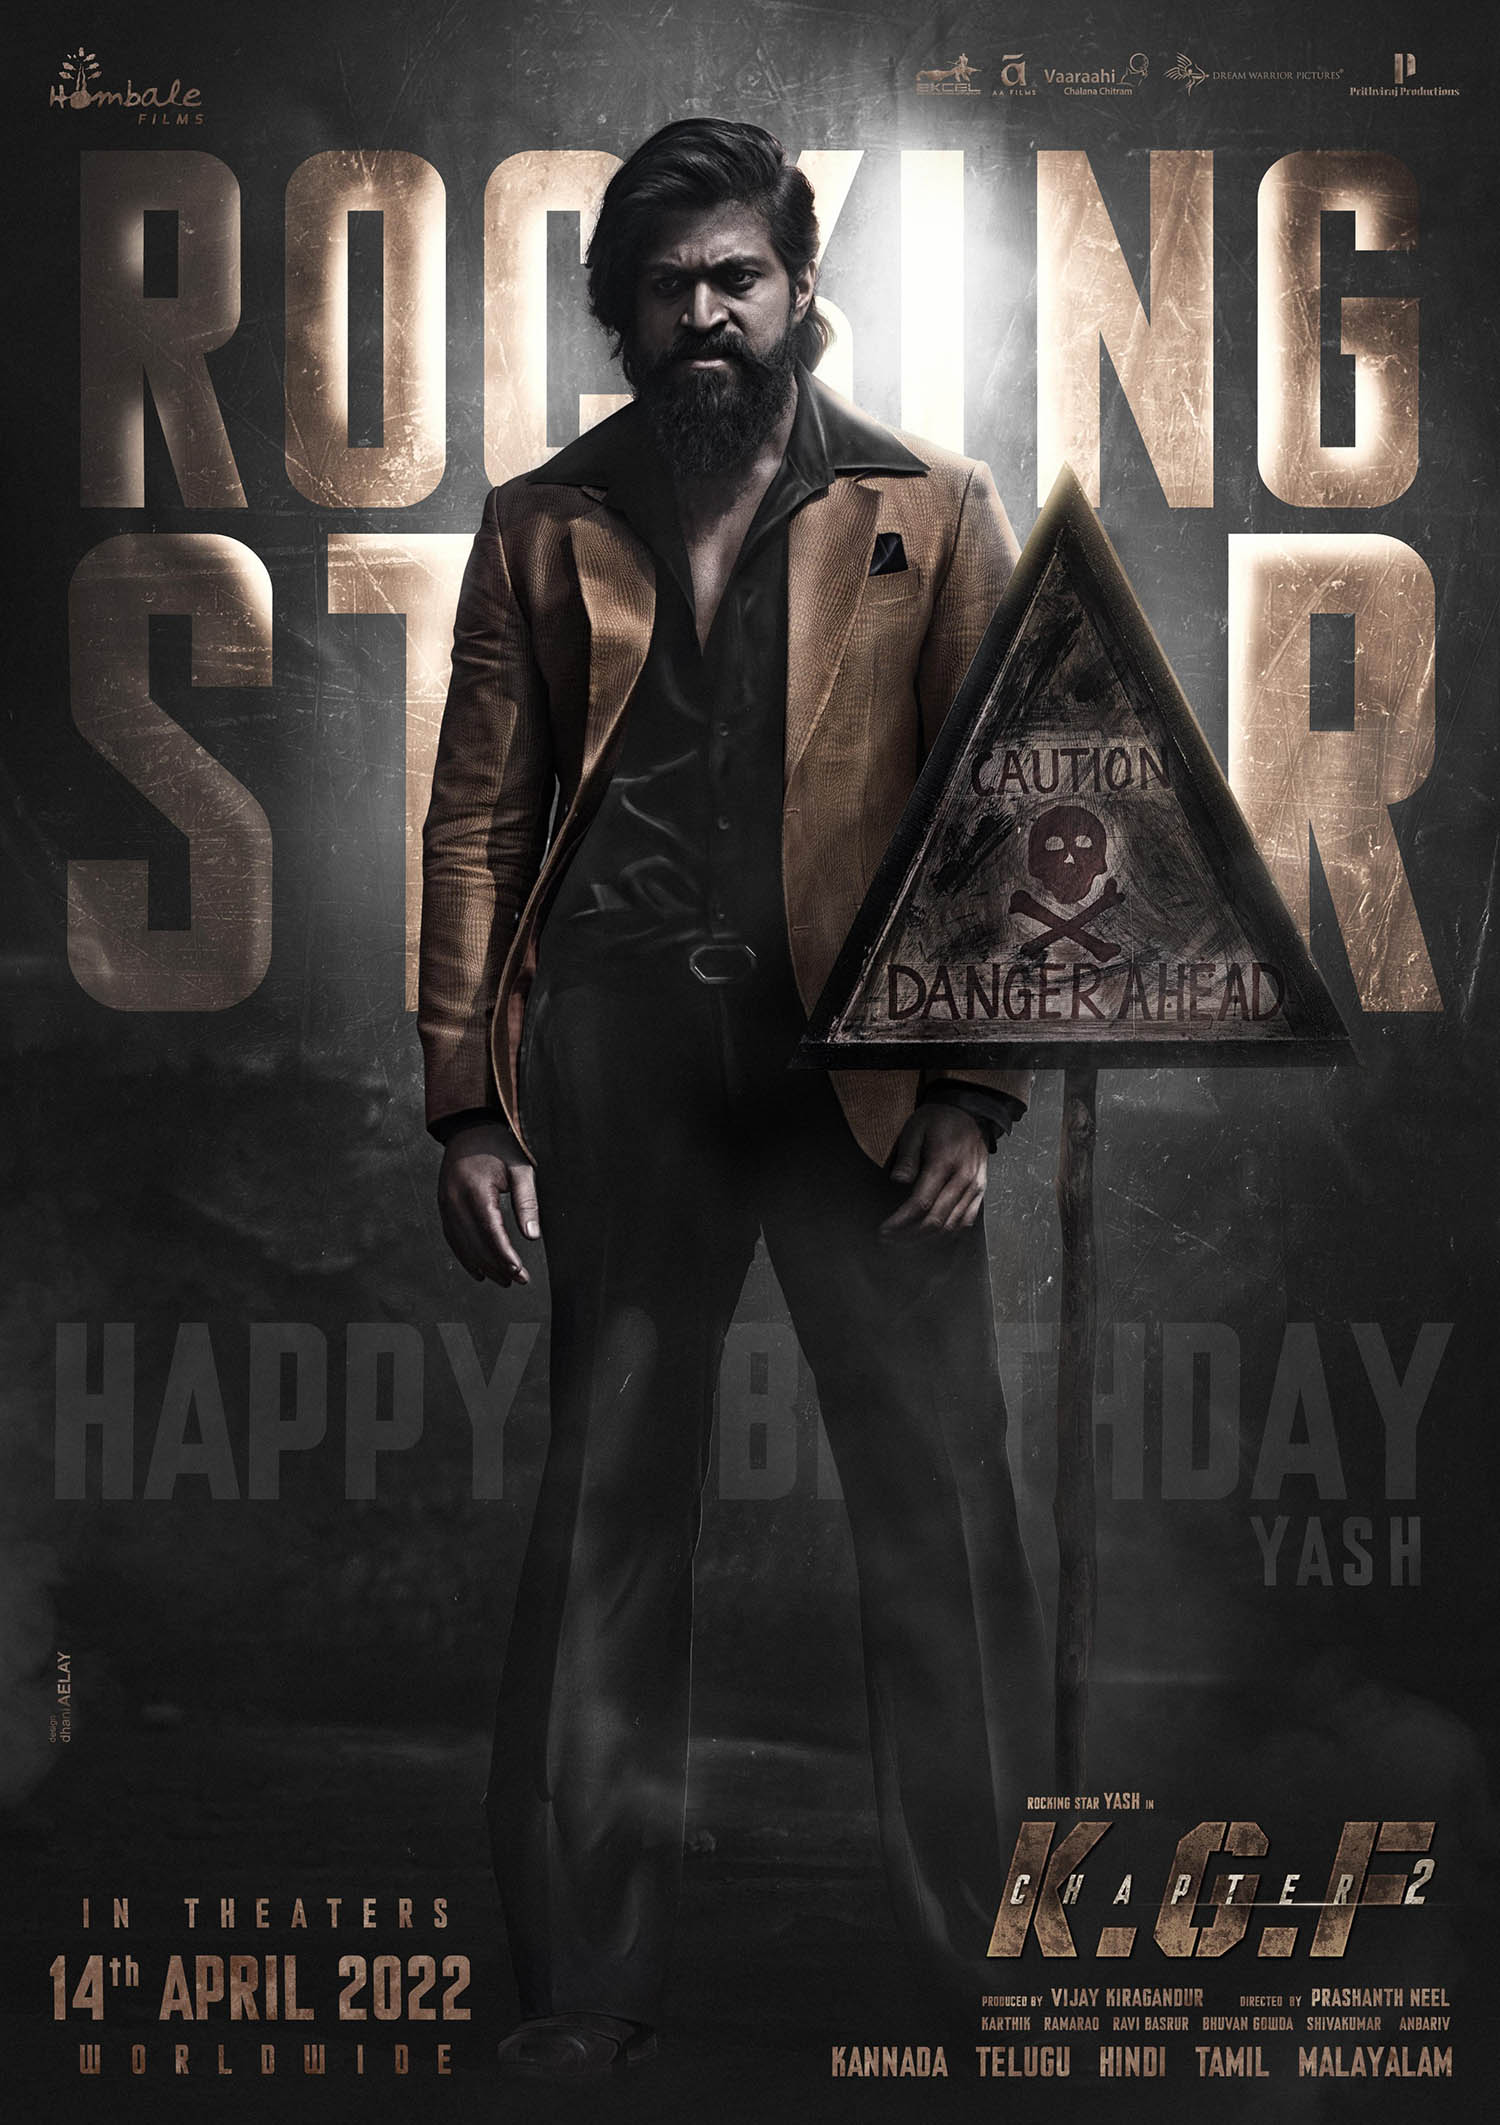 kgf 2 yash birthday special poster 2022,kgf 2 poster,kannada actor yash,kgf actor yash birthday,kgf 2 still,kgf 2 updates,latest south indian film news,kgf 2 release